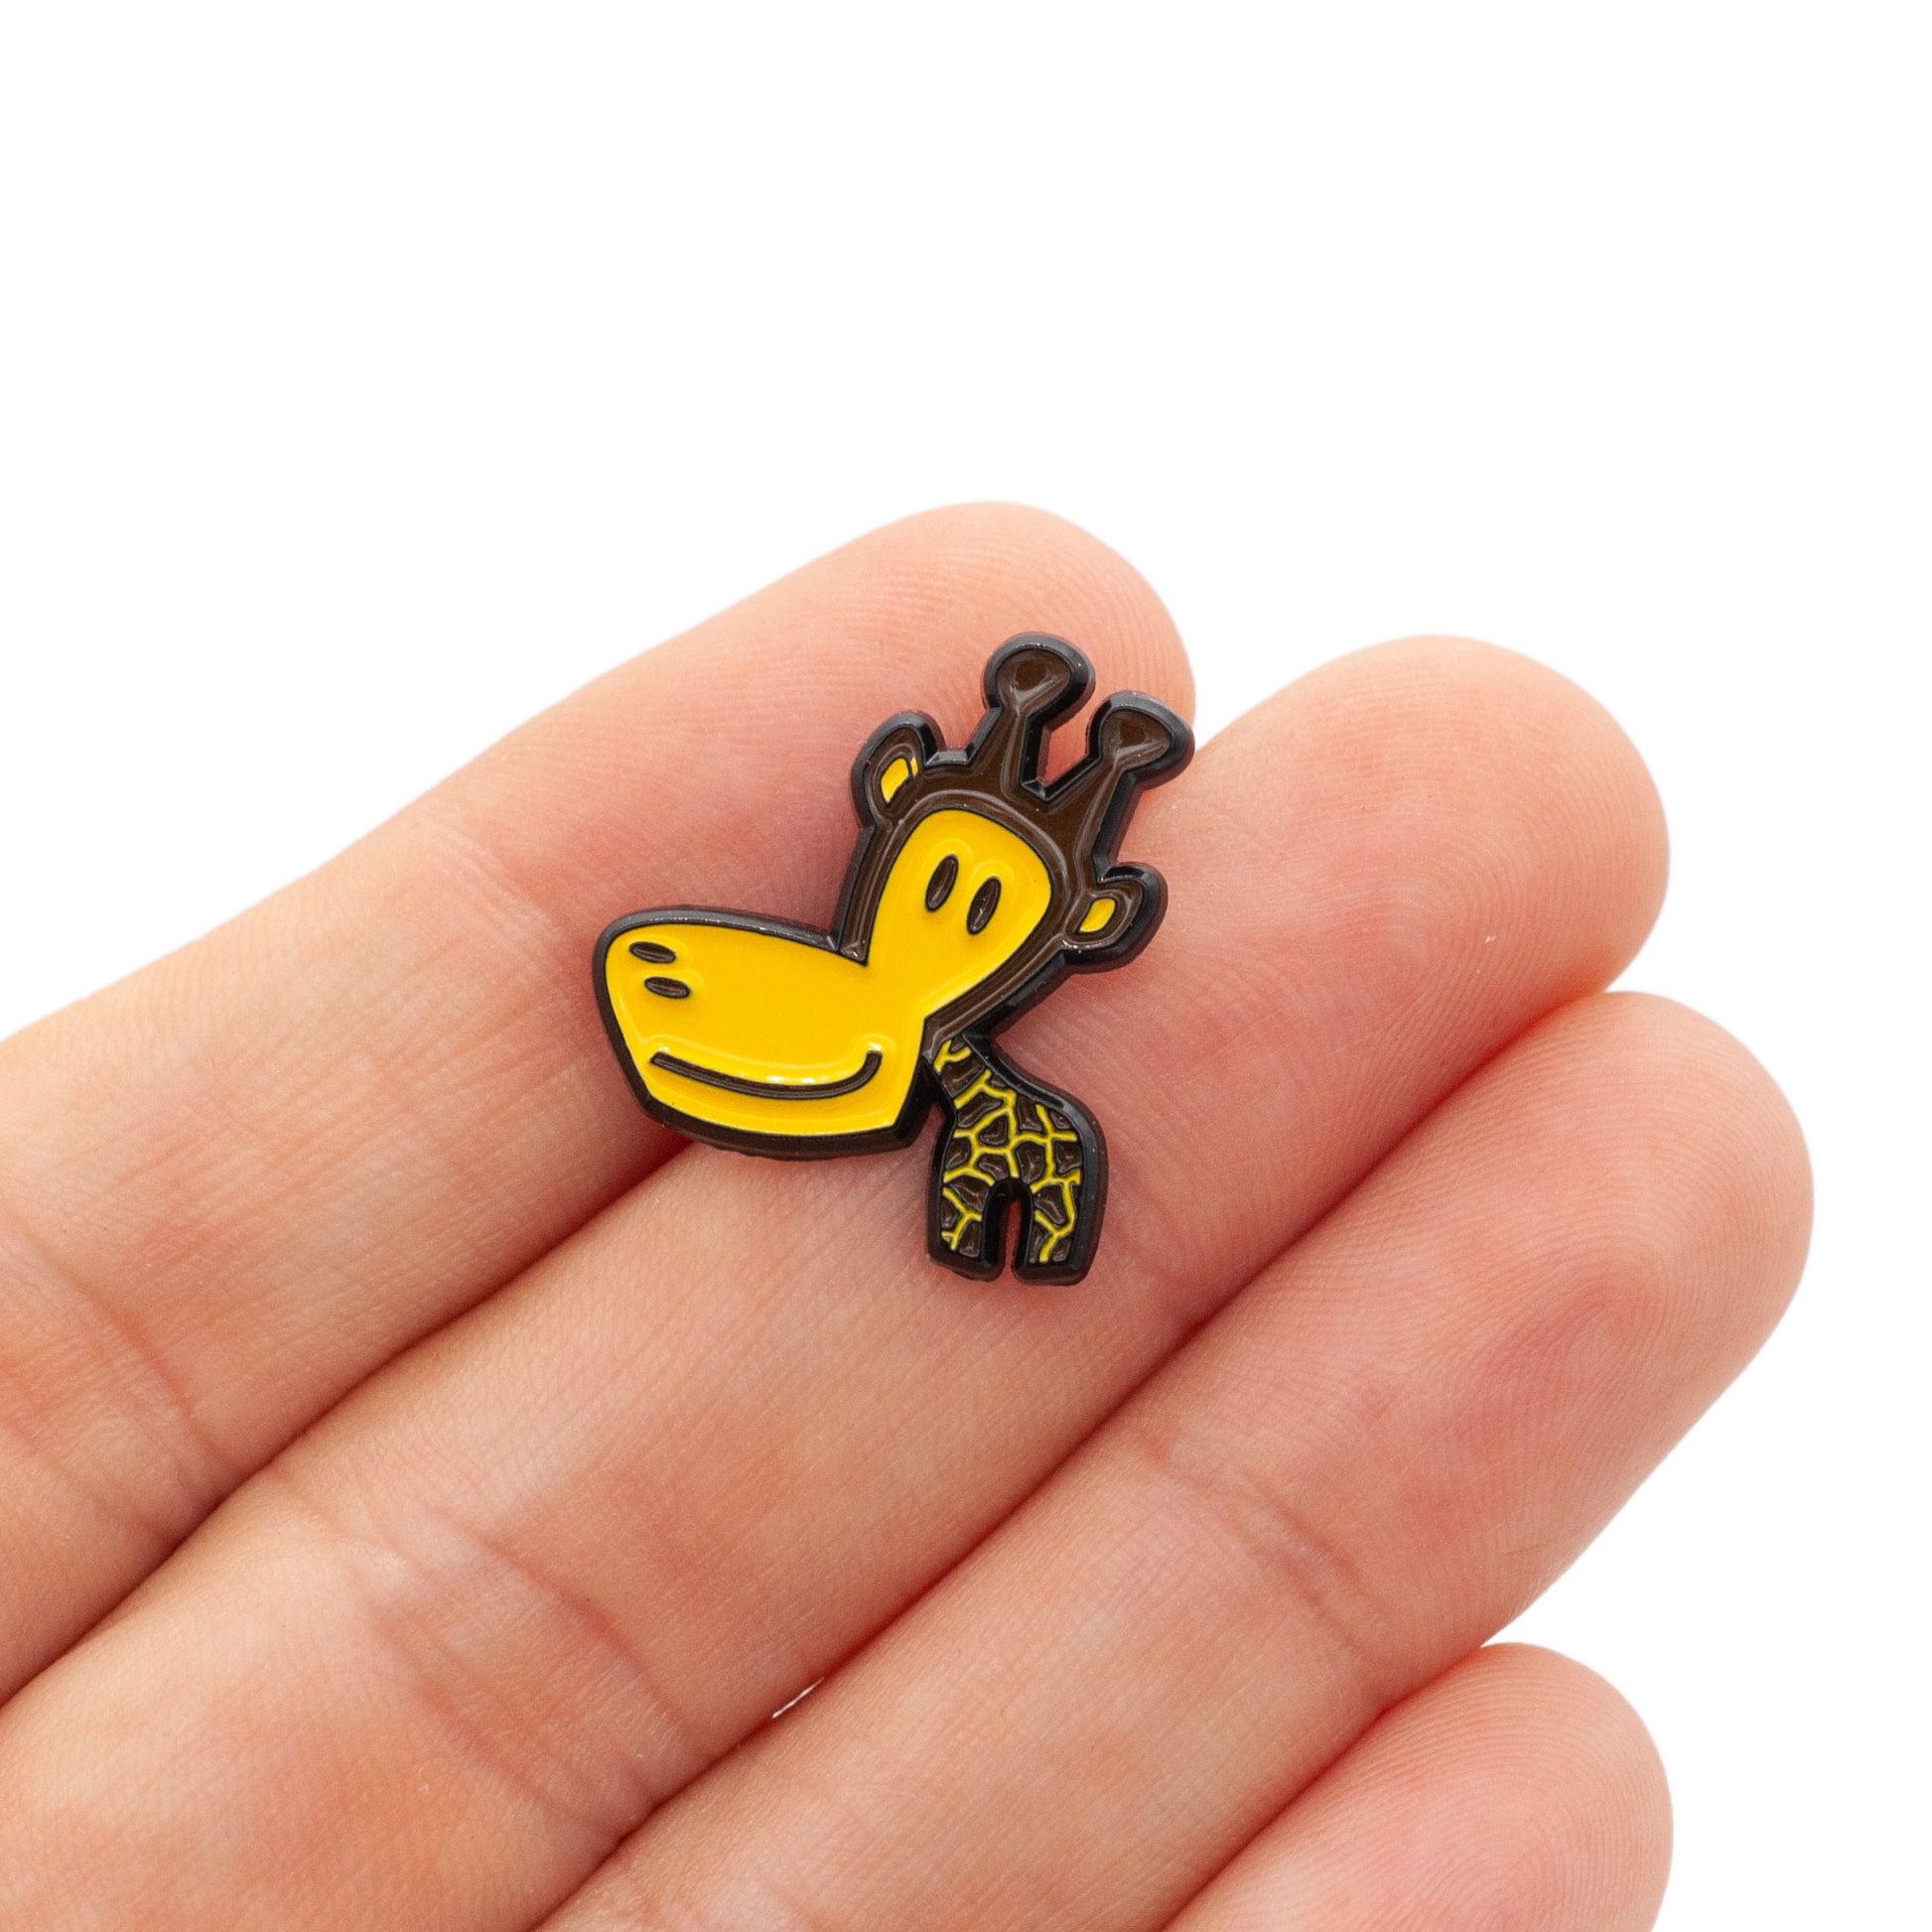 small brown and yellow giraffe pin resting on hand, over white background.